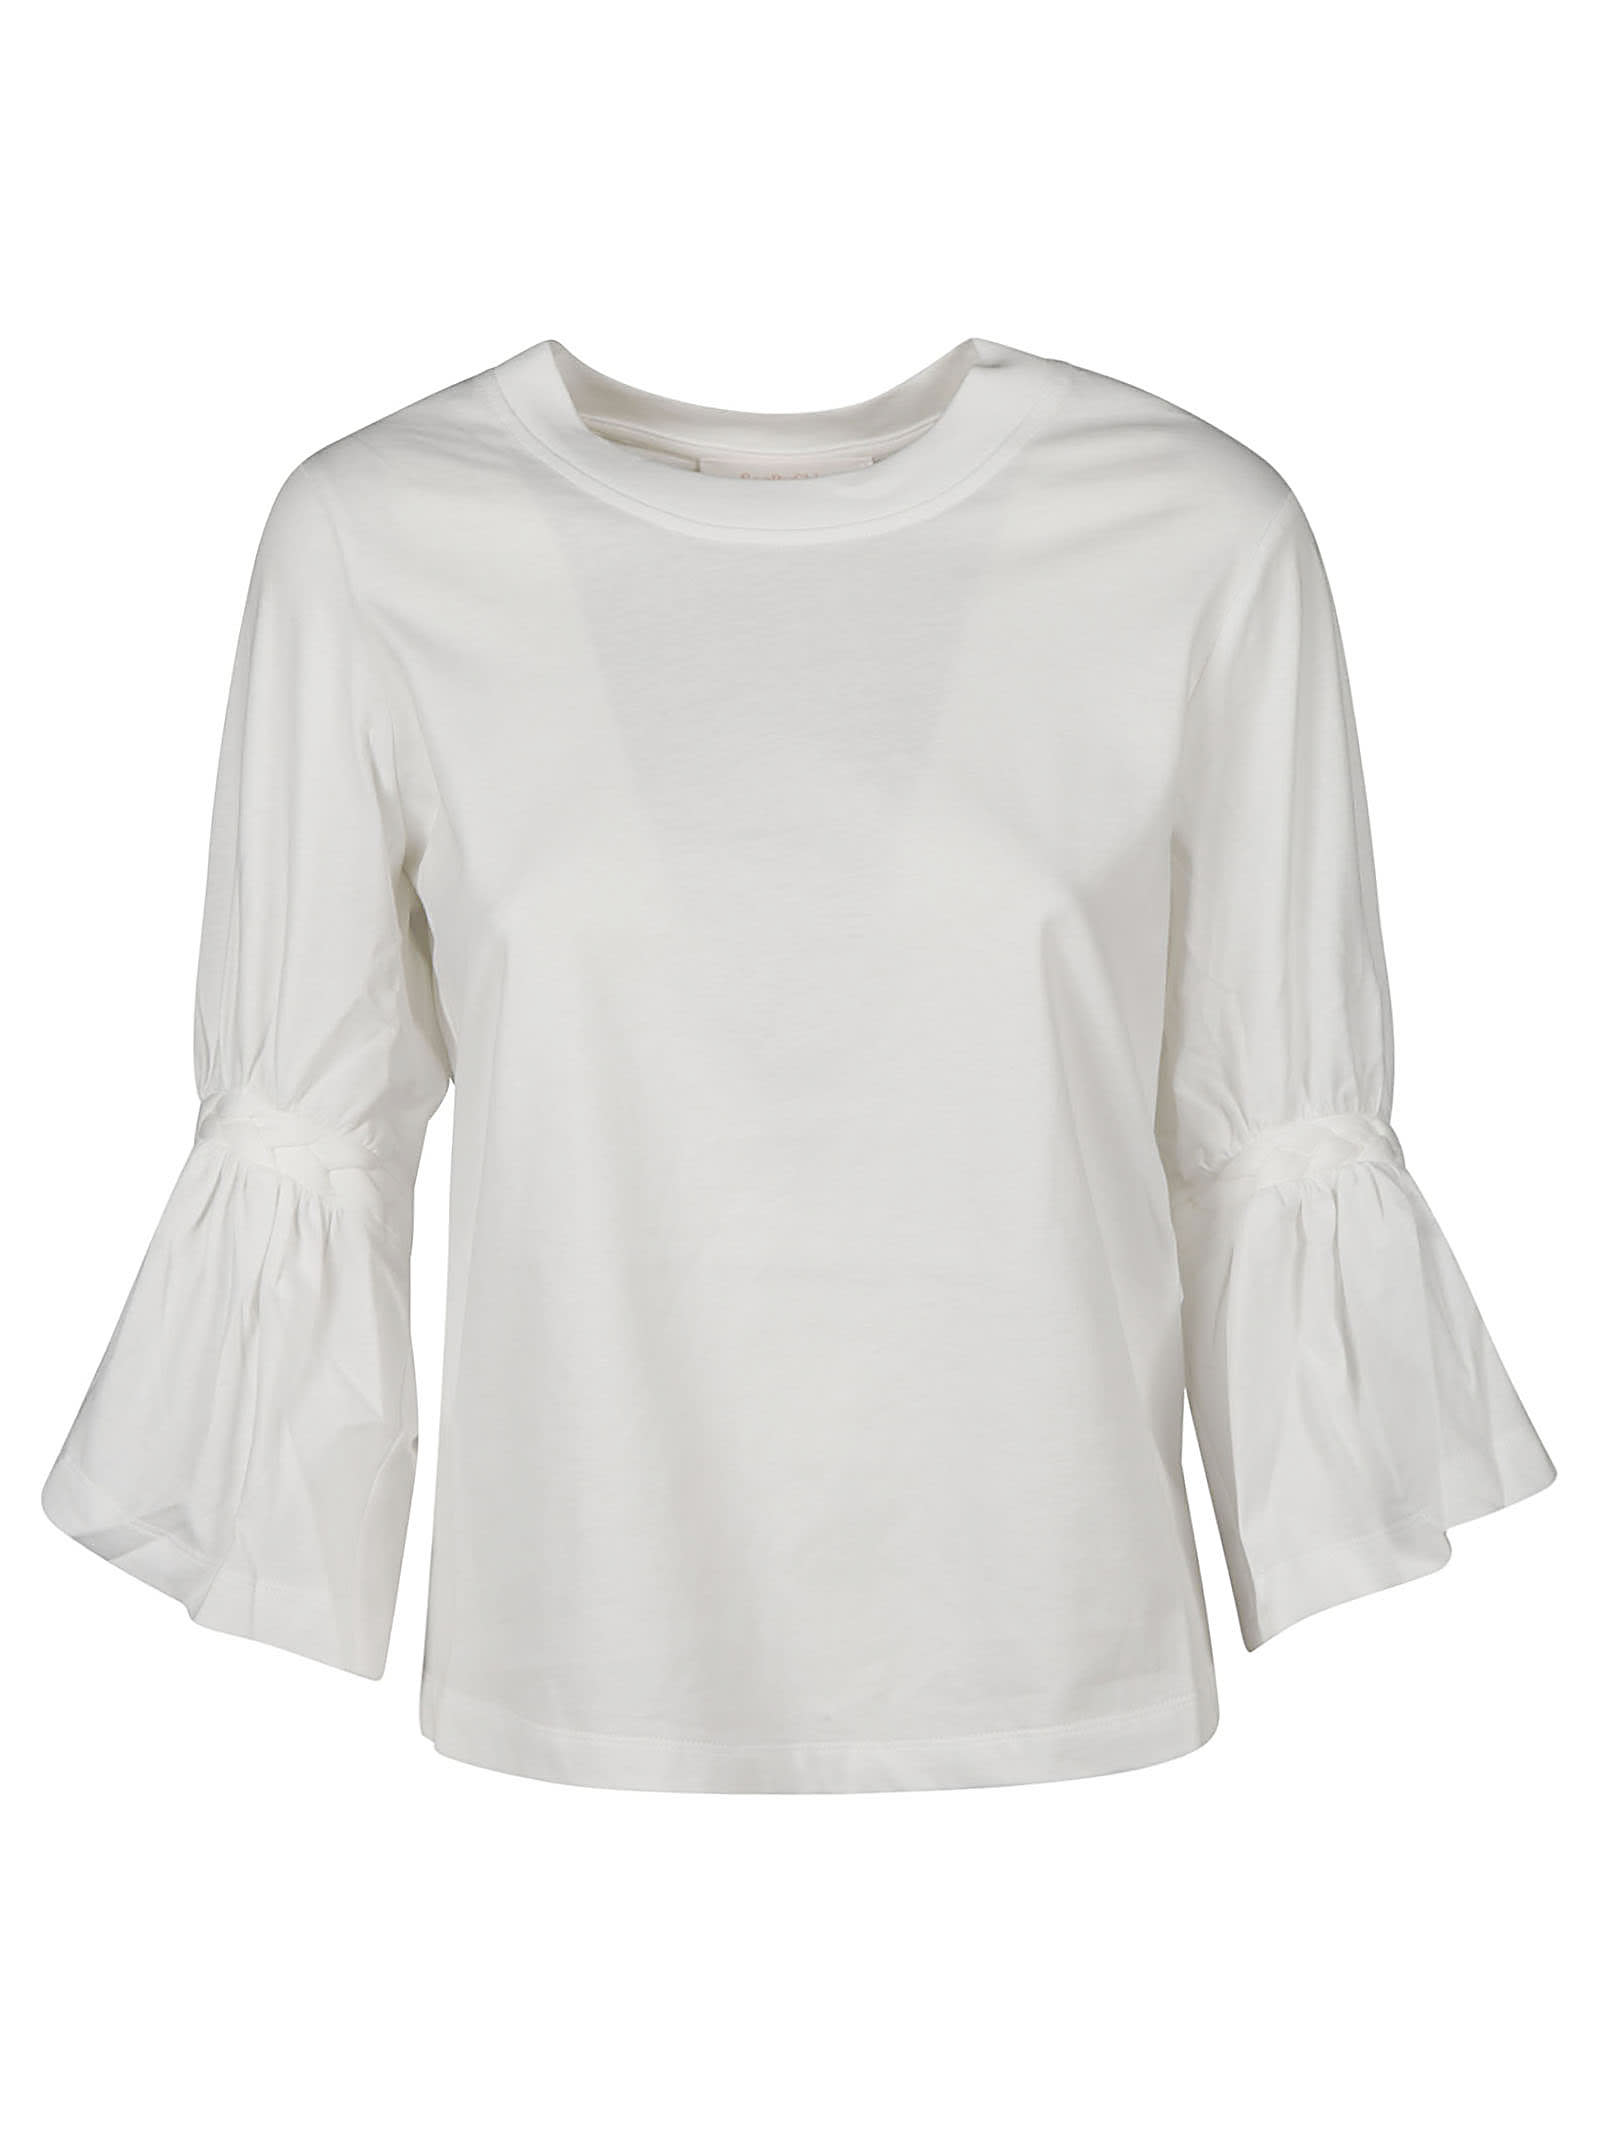 See by Chloé Flared Sleeves Top